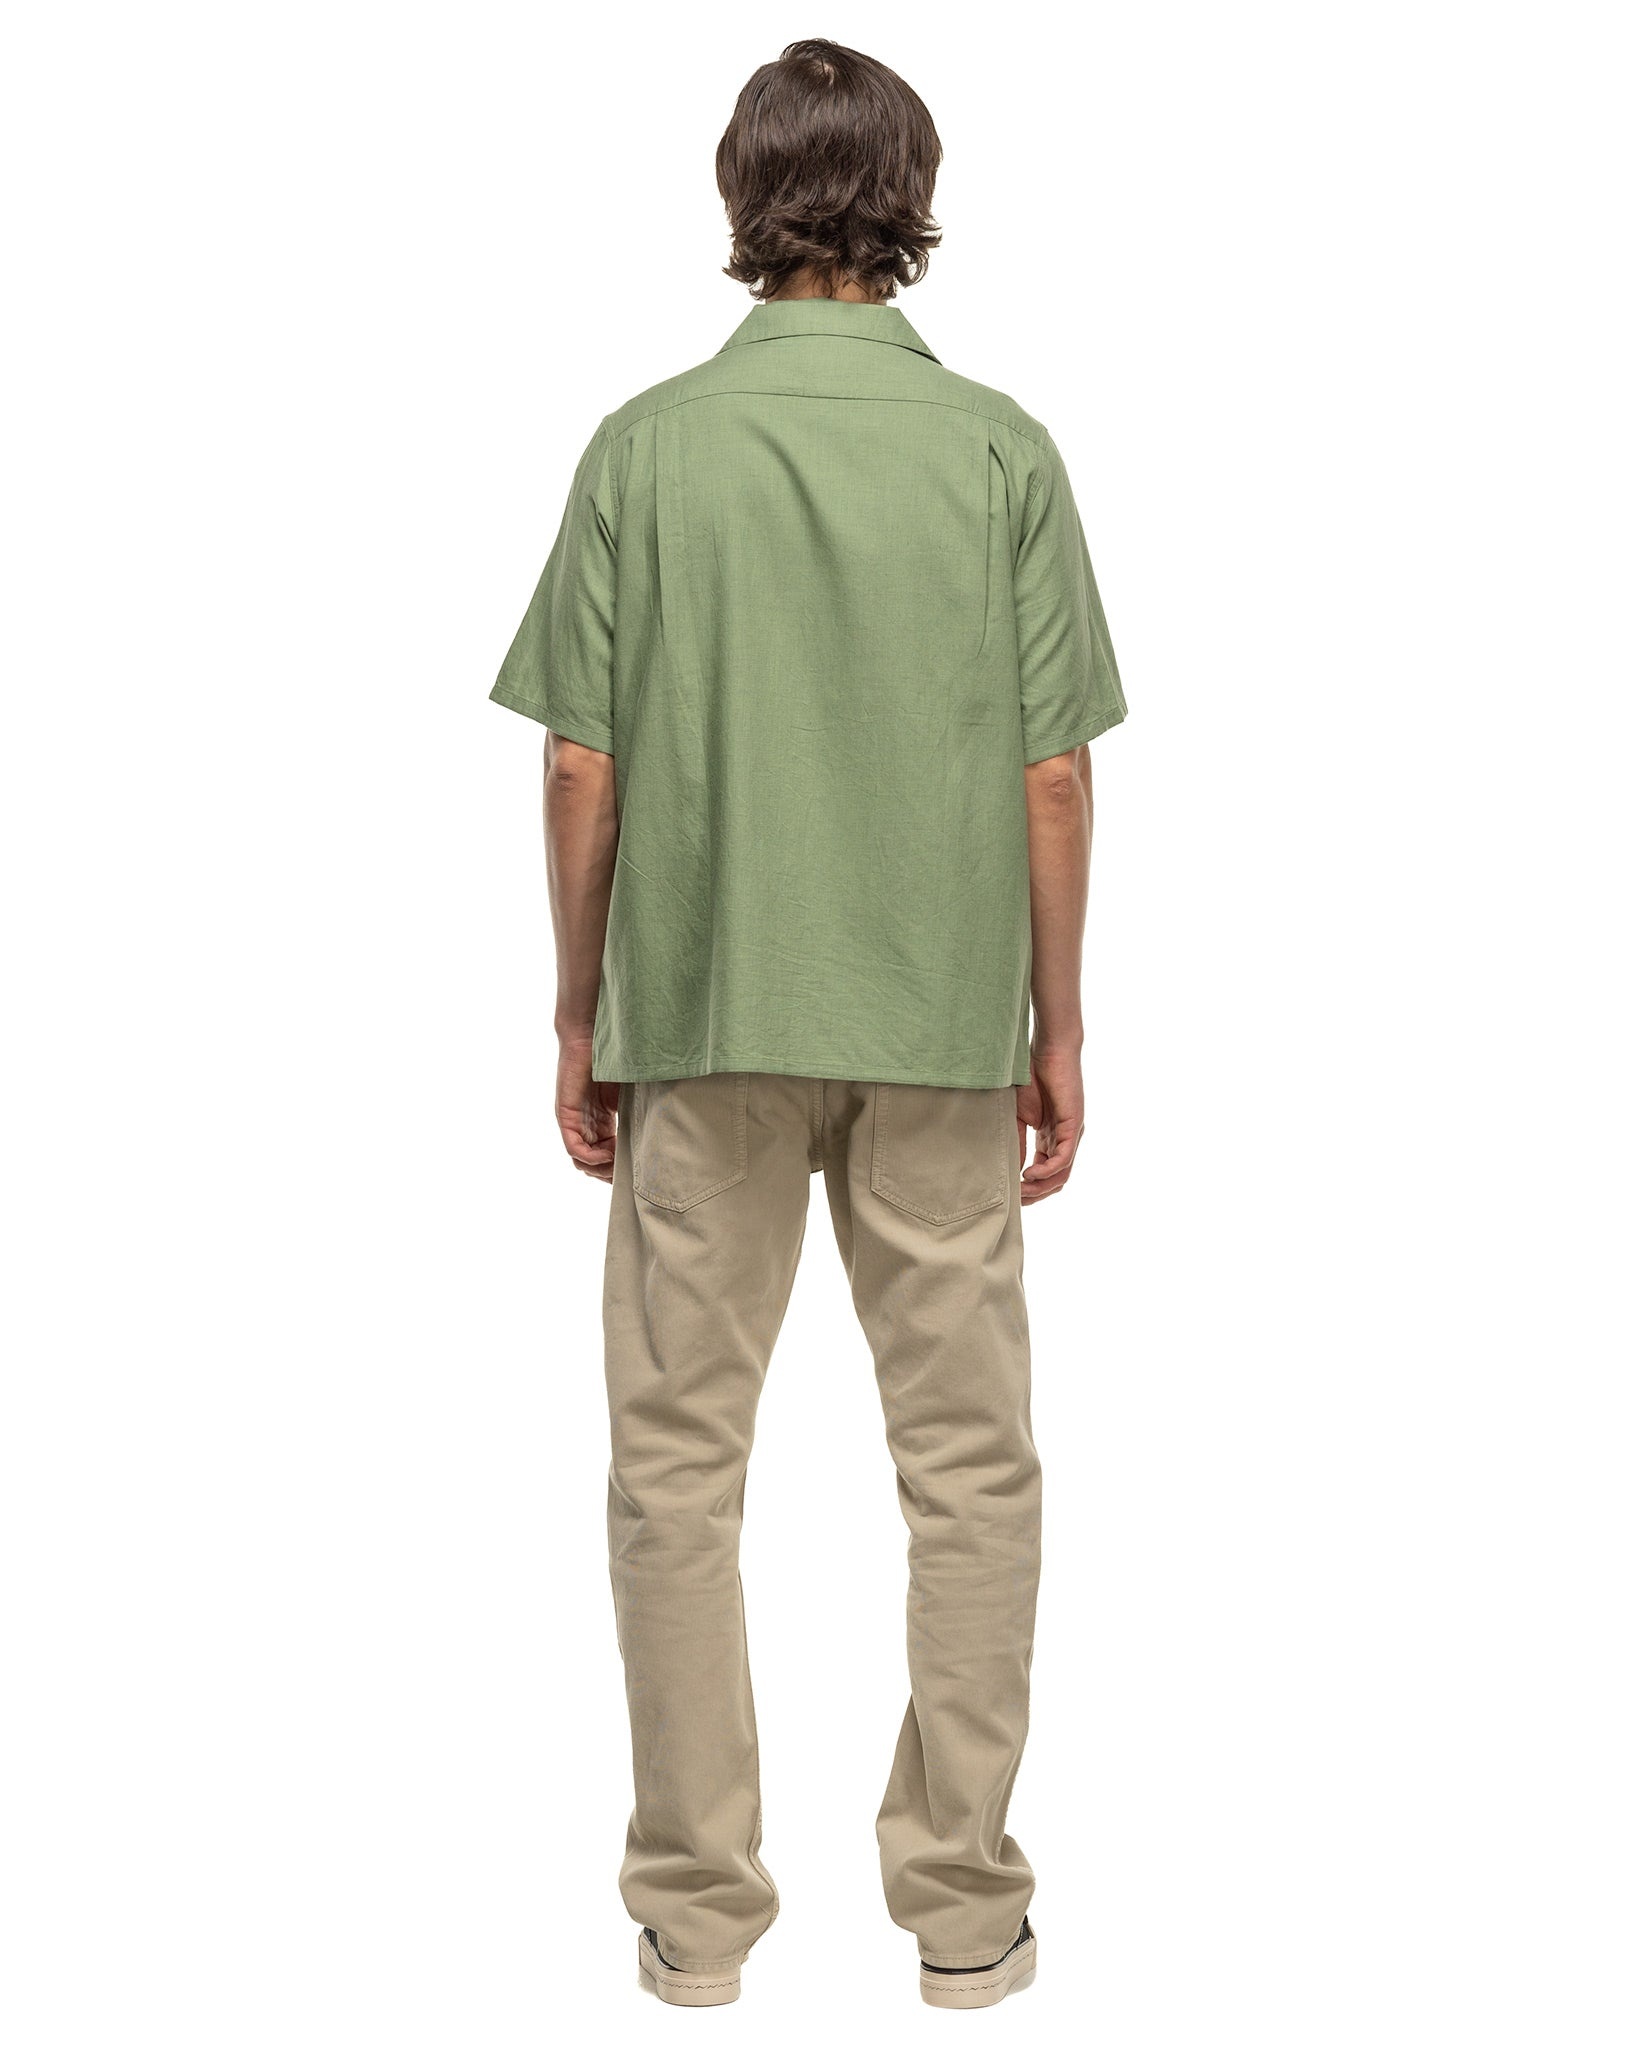 Keesey G.S. Shirt S/S Green - 3